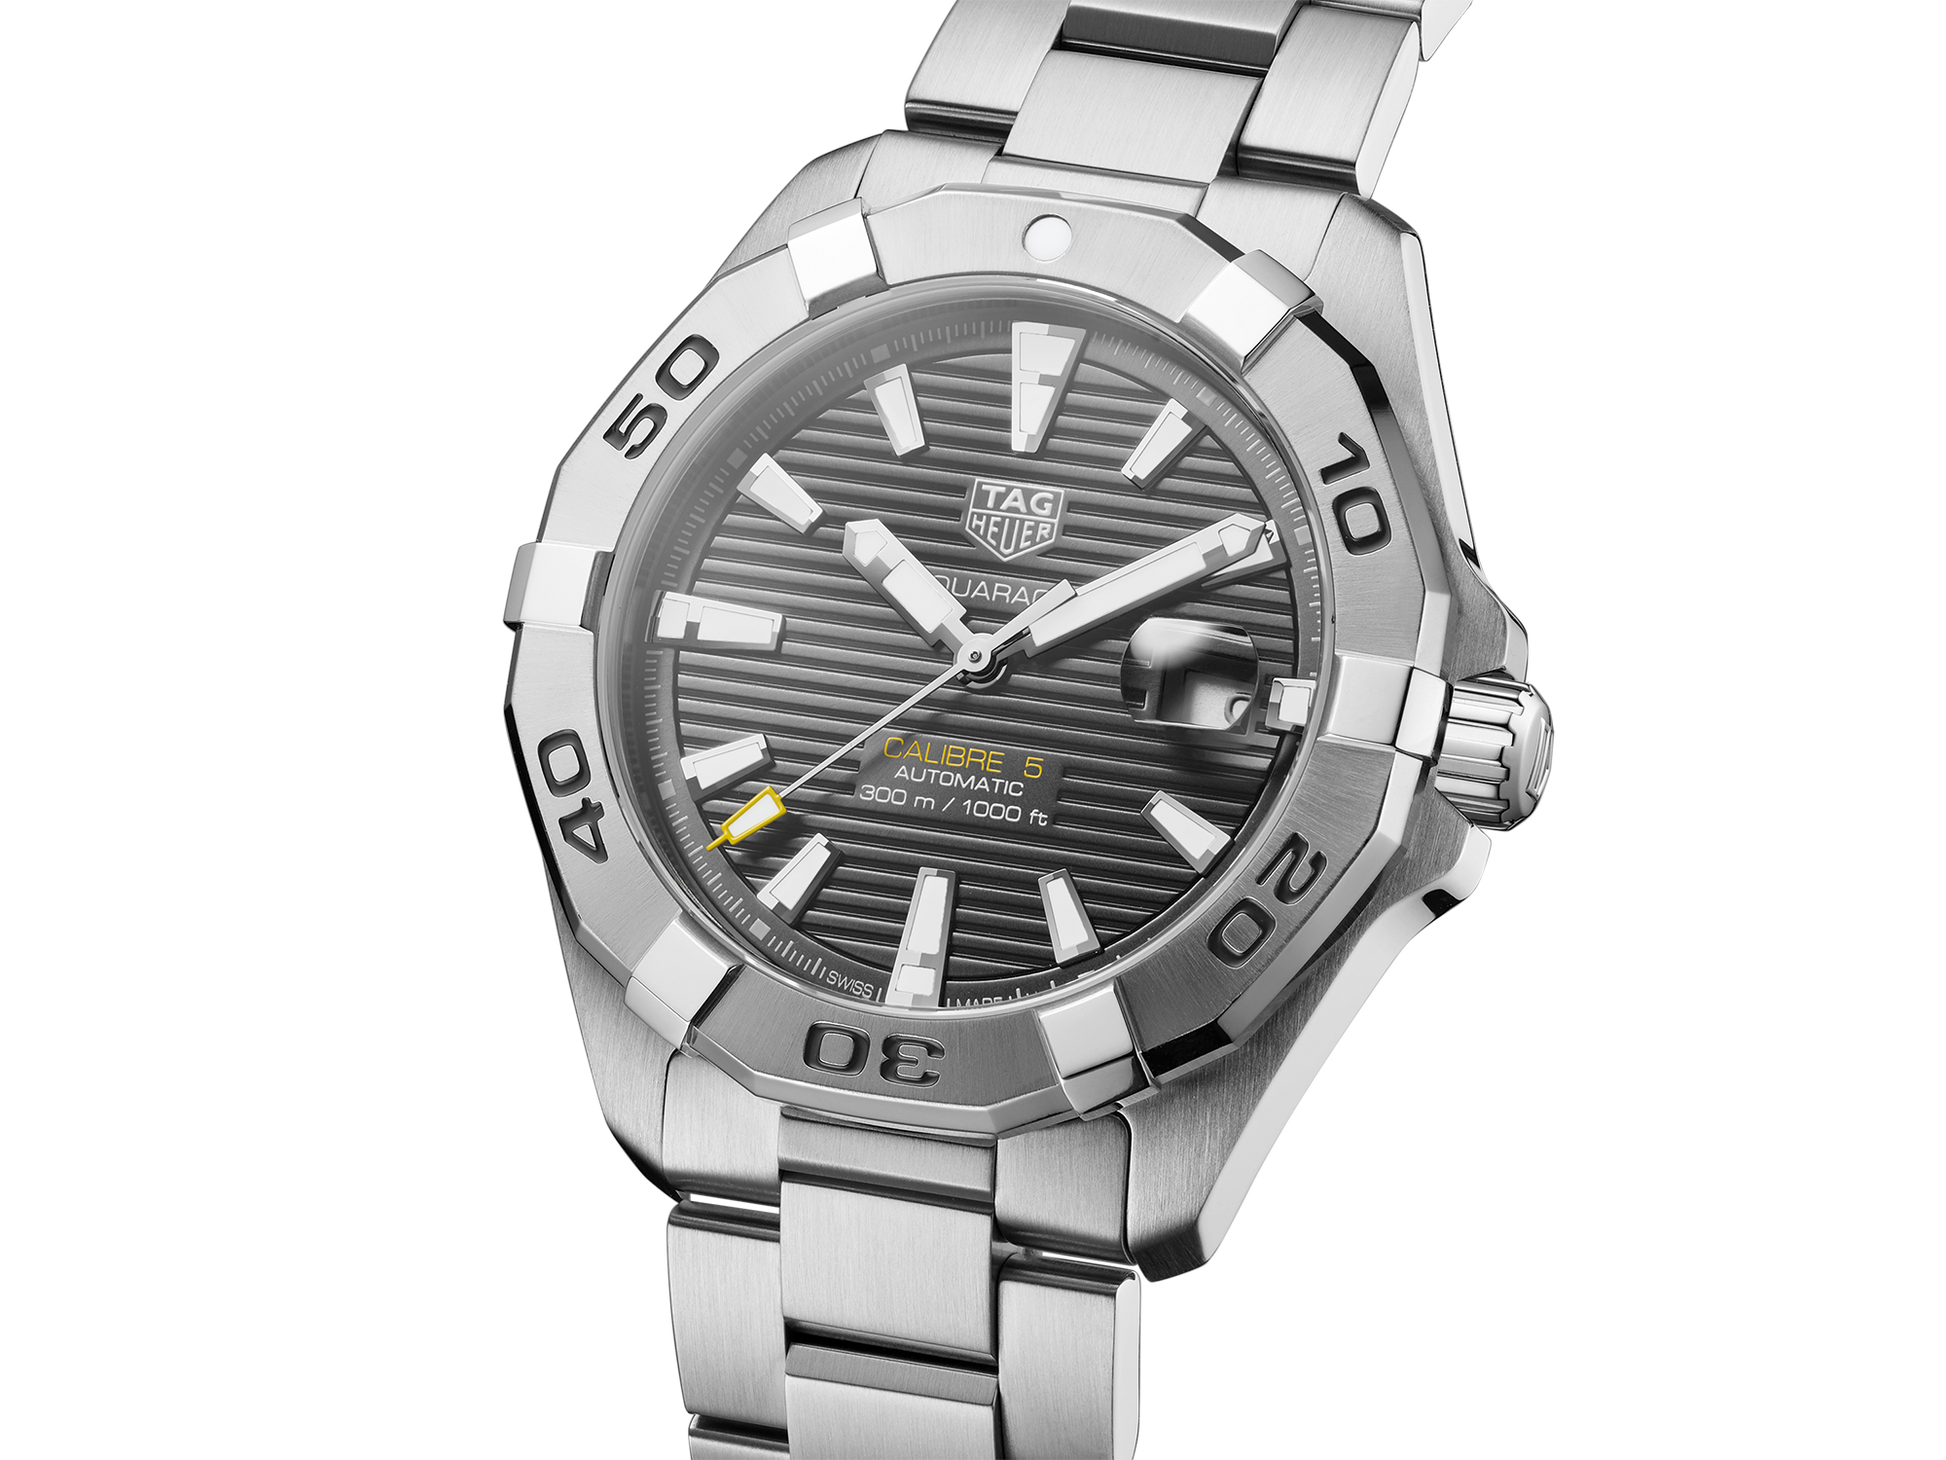 Tag Heuer Aquaracer Calibre 5 Automatic Grey Dial Silver Steel Strap Watch for Men - WBD2113.BA0928